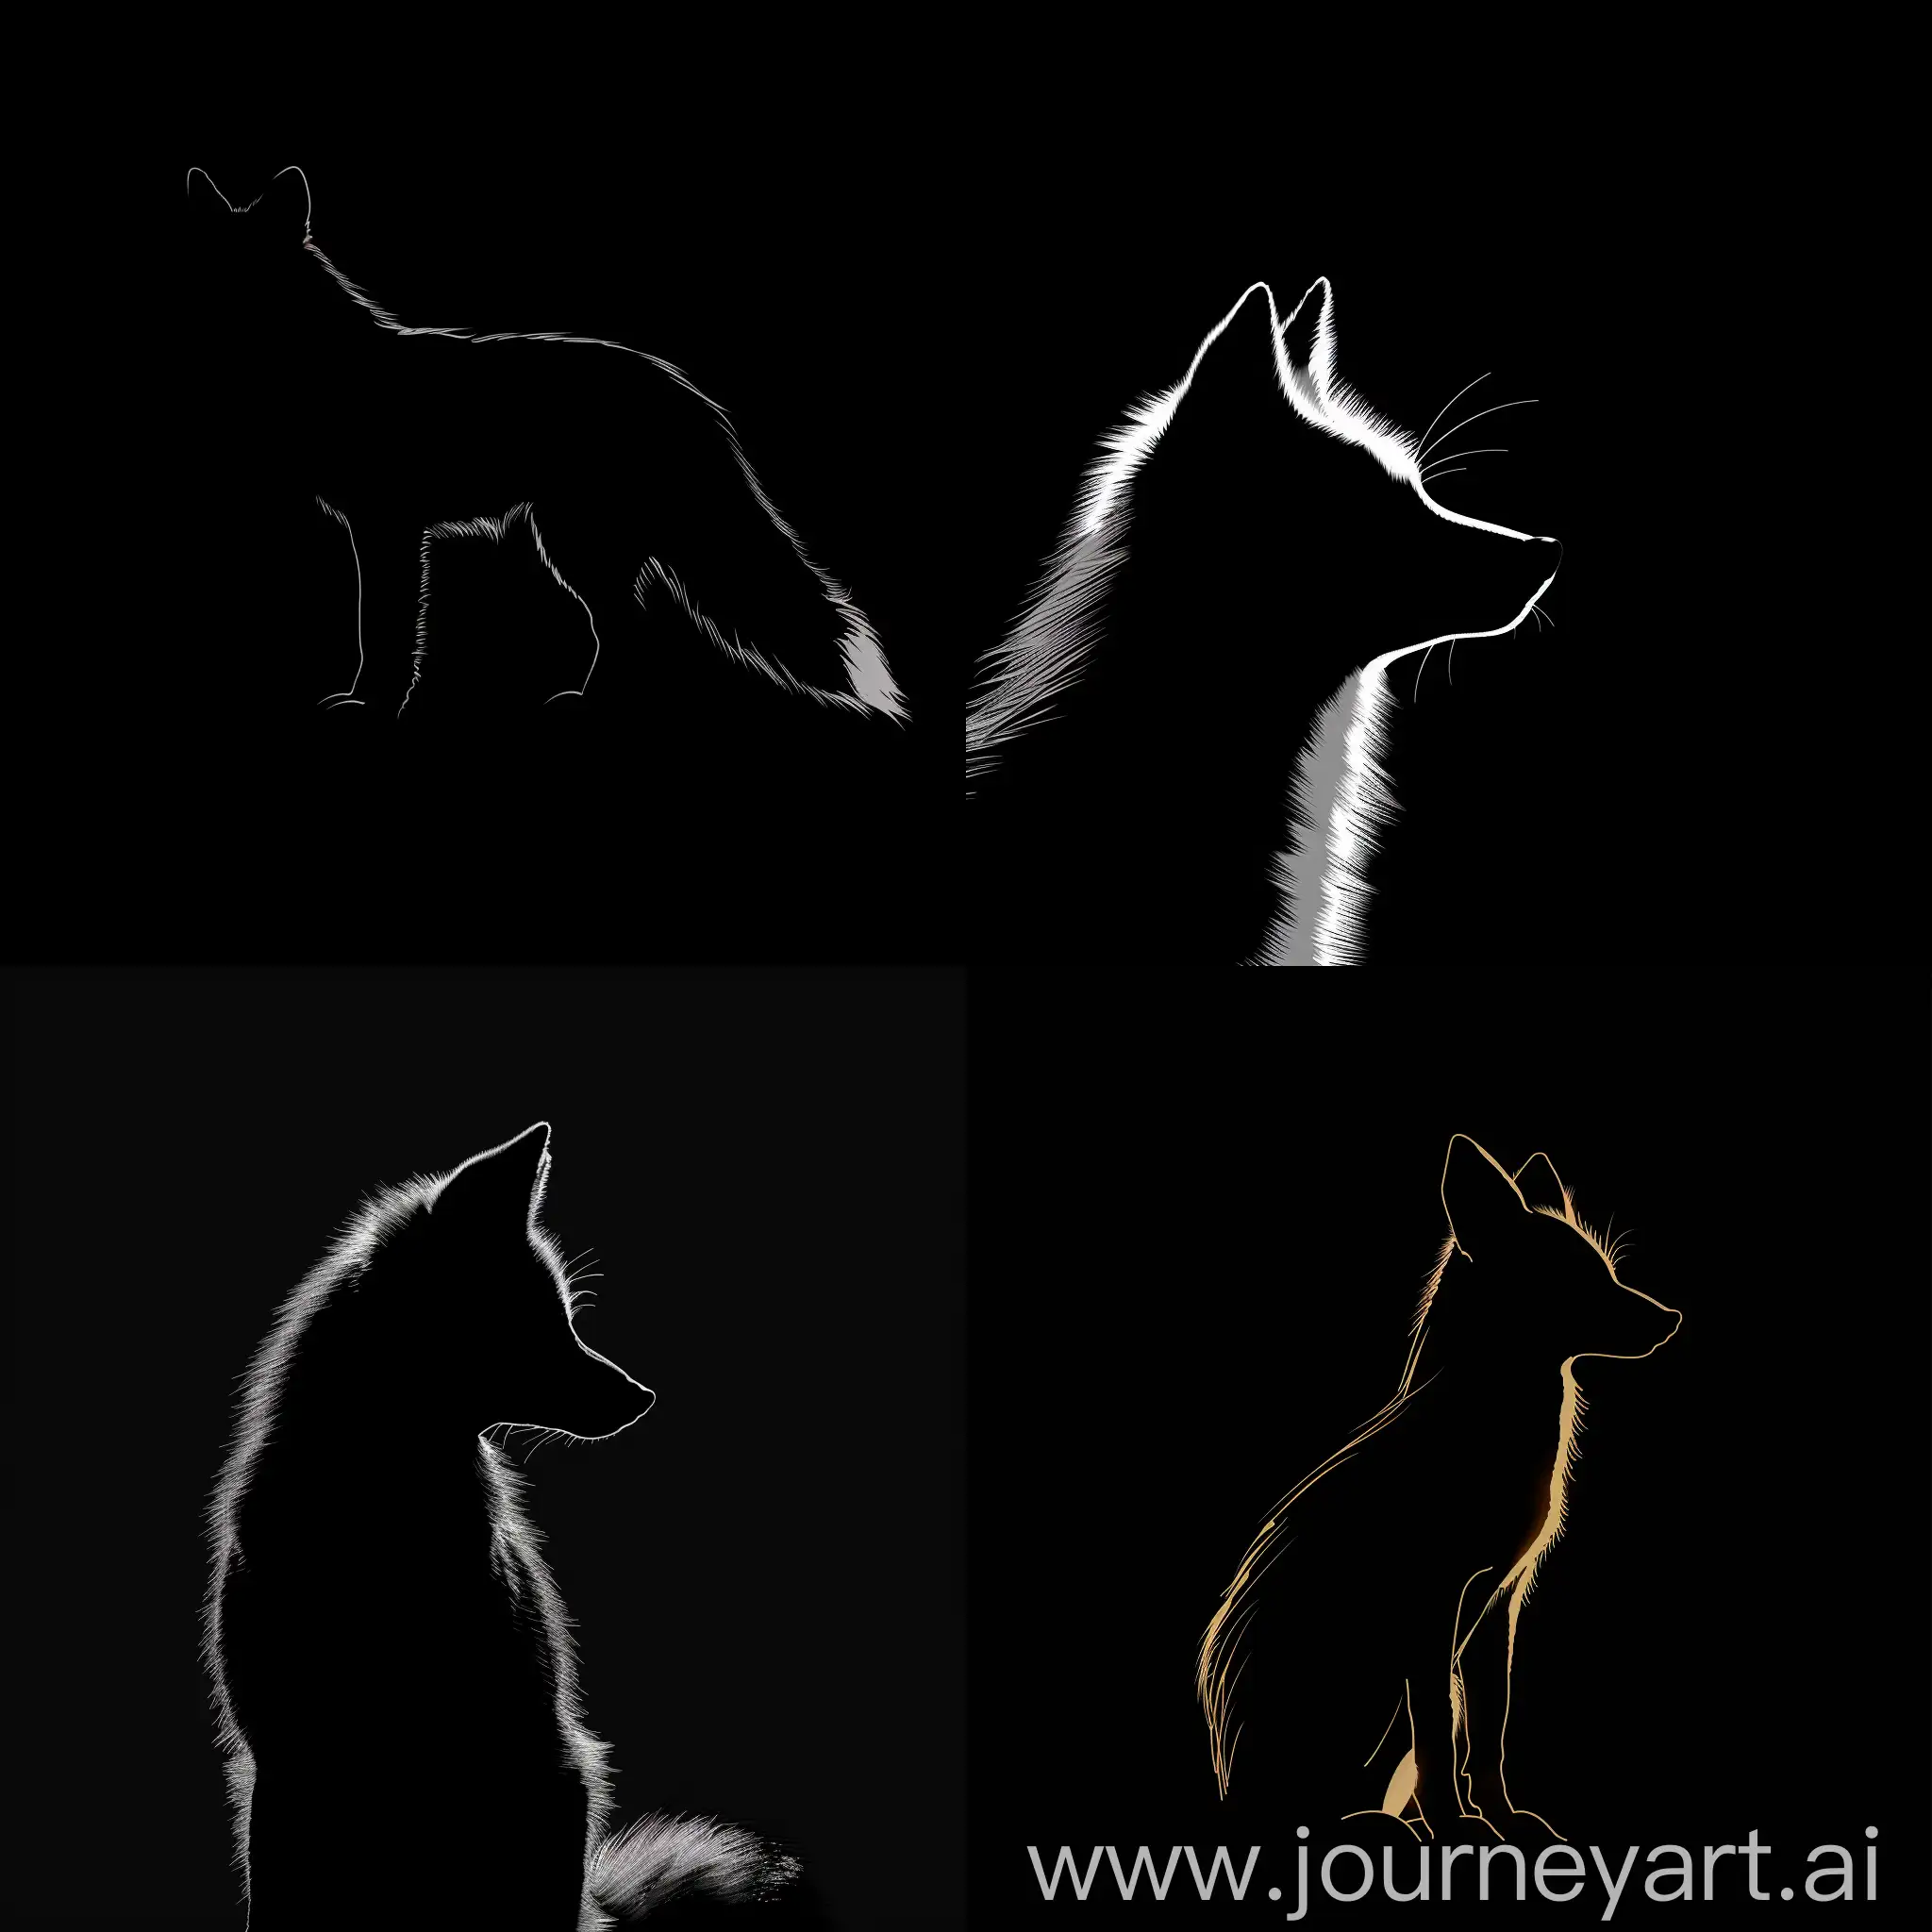 one silhouette of a fox minimalism on a black background